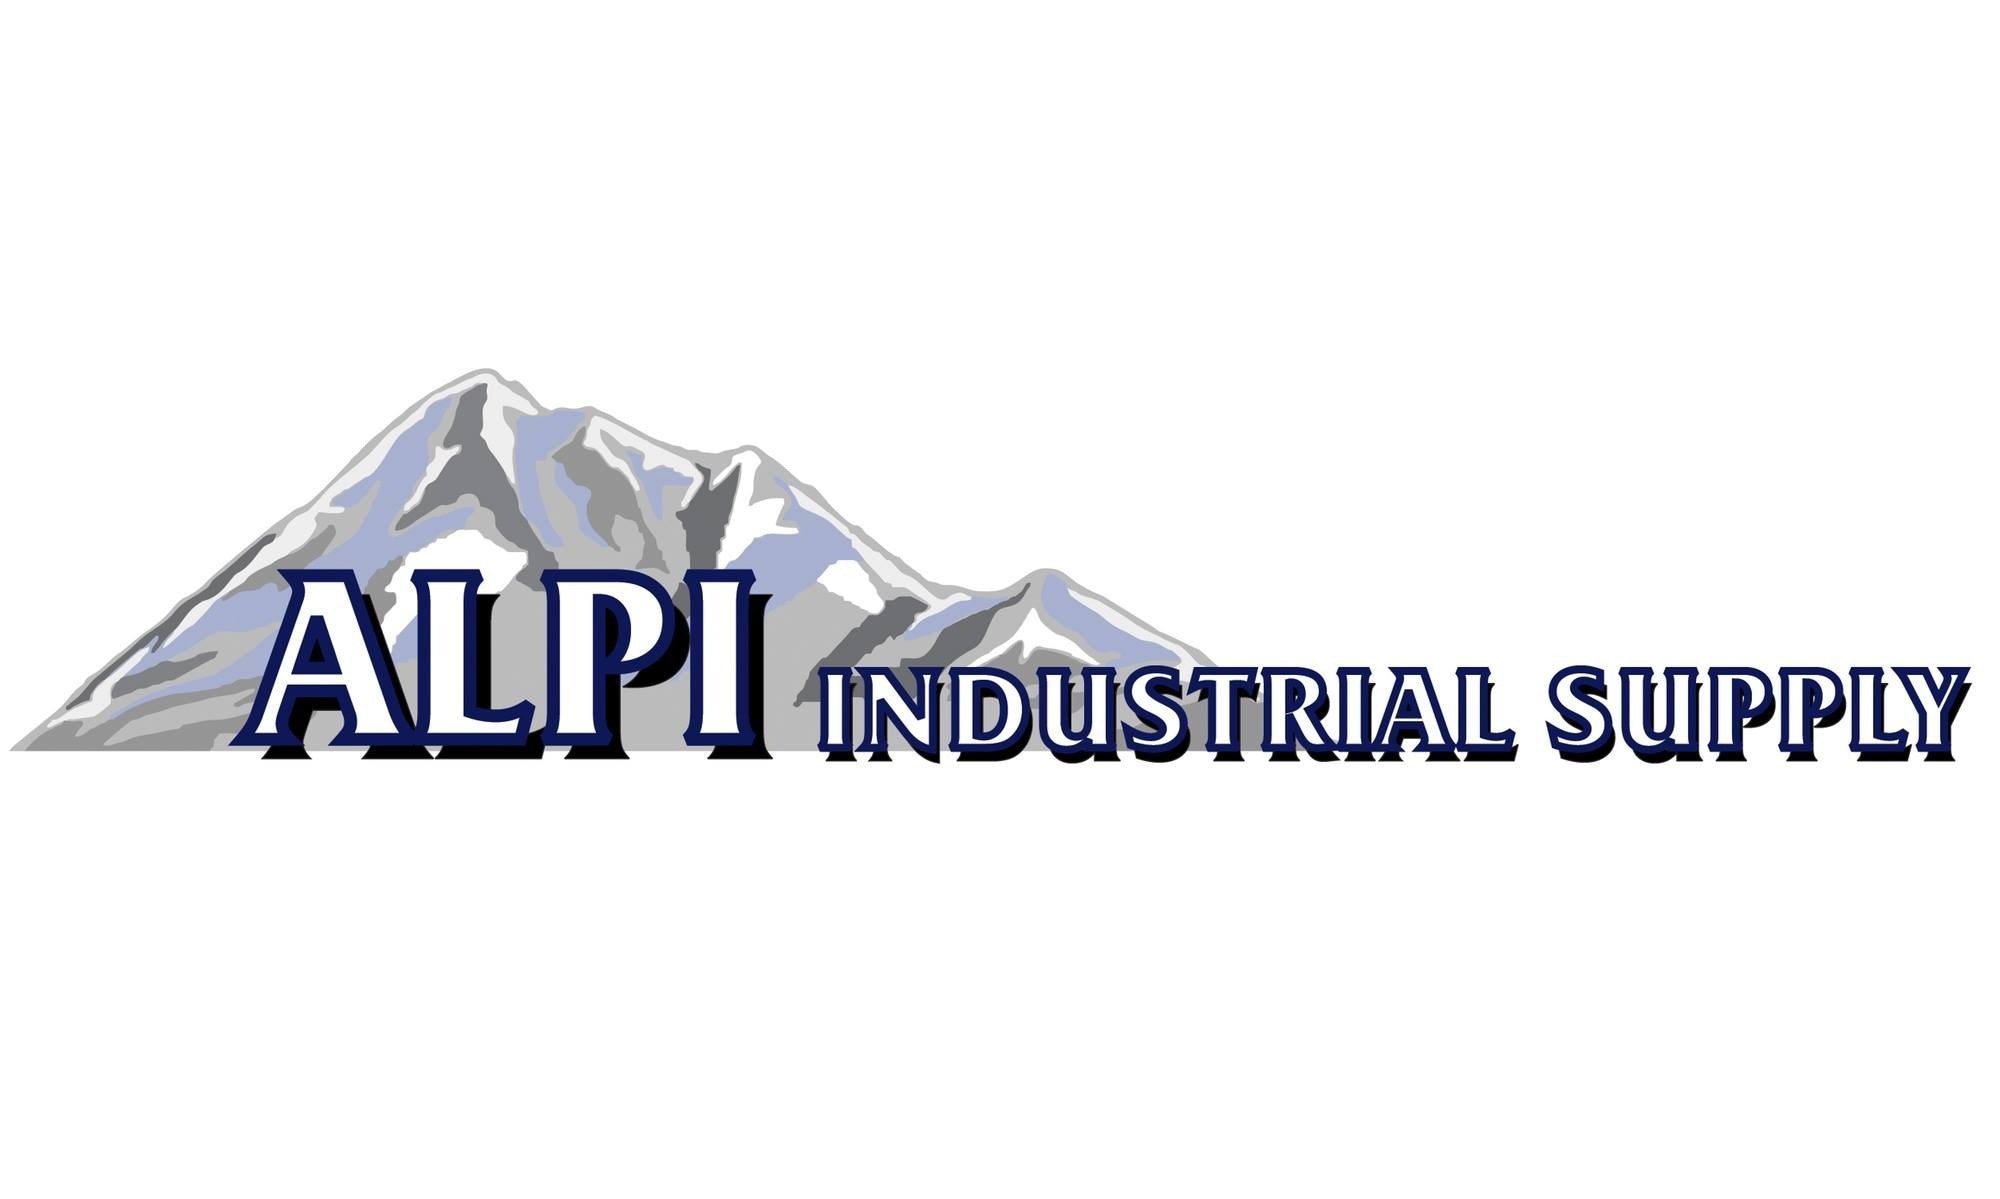 Alpi Industrial Supply : Quotes, Address, Contact